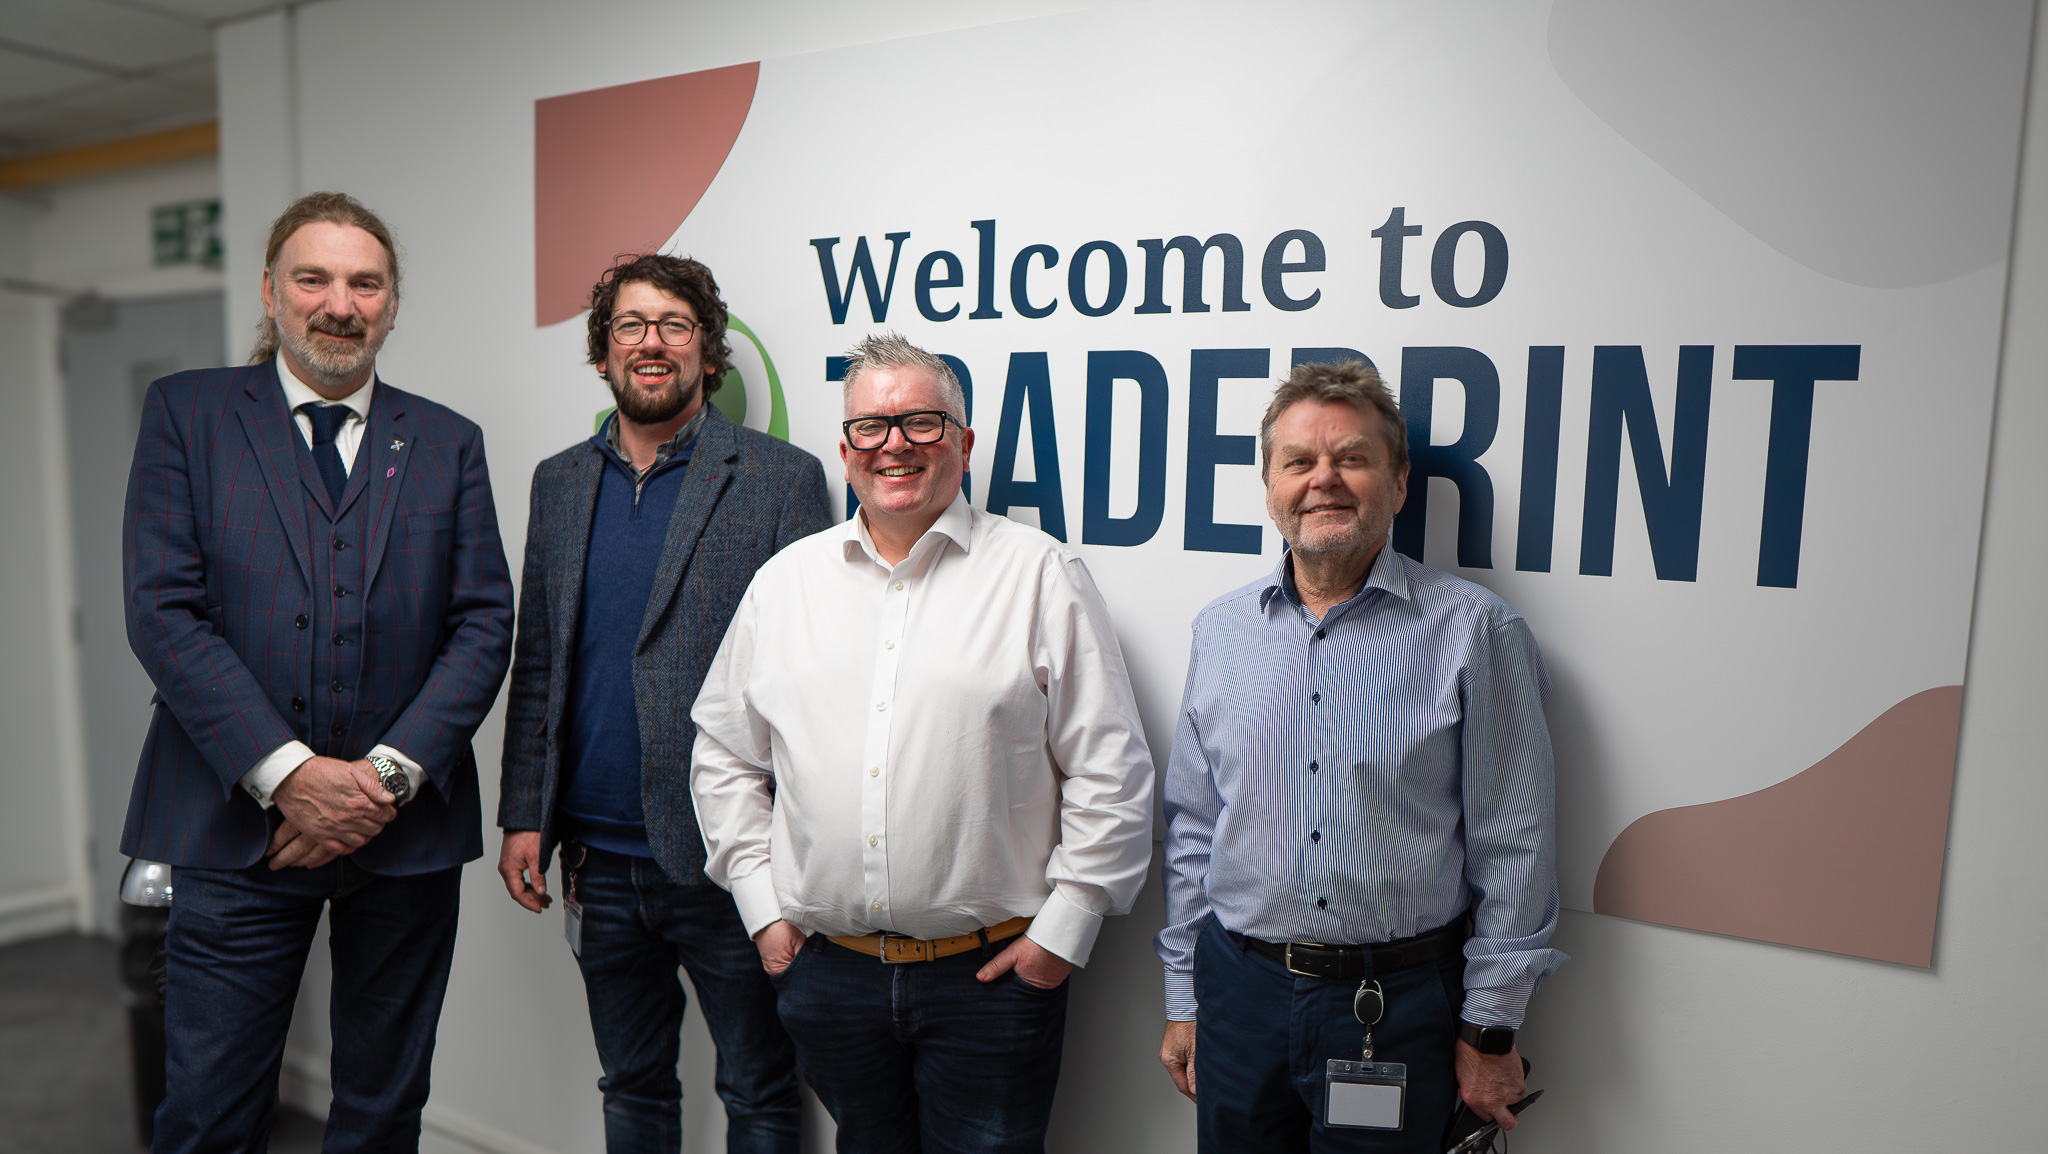 Tradeprint Hosts Local MP Chris Law, Showcasing Expansion and Discussing Industry Challenges